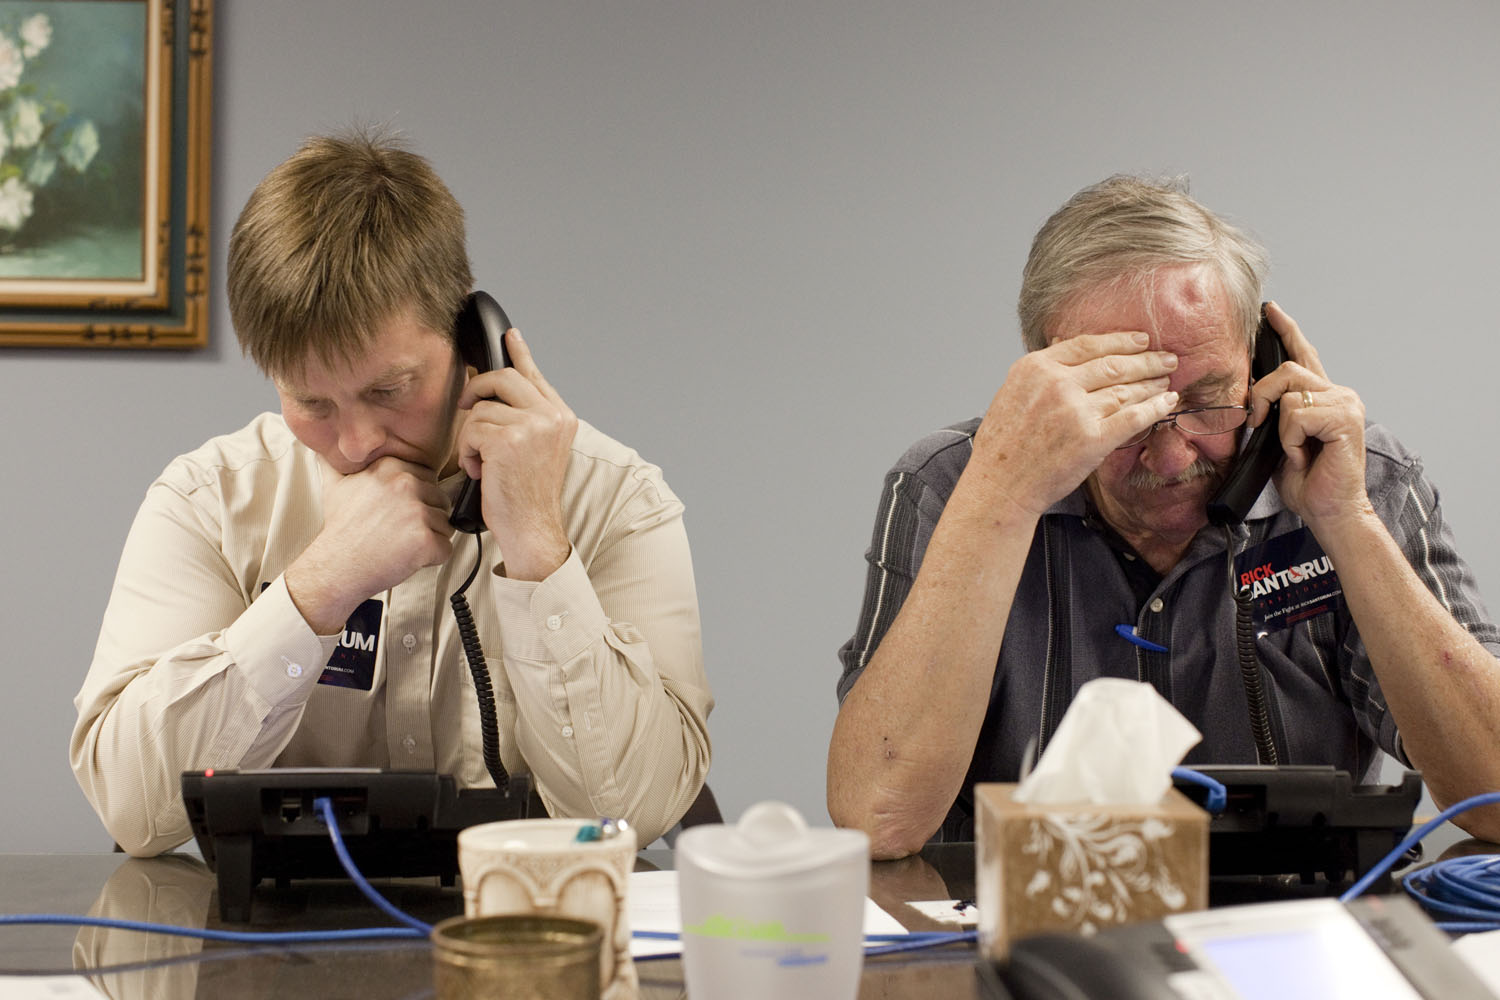 Image: Volunteers Paul J. Besse (L) and Bruce Donelly make evening phone calls to Louisiana residents at Rick Santorum's Louisiana campaign headquarters in Jefferson Parish, Metairie, La. March 19, 2012.